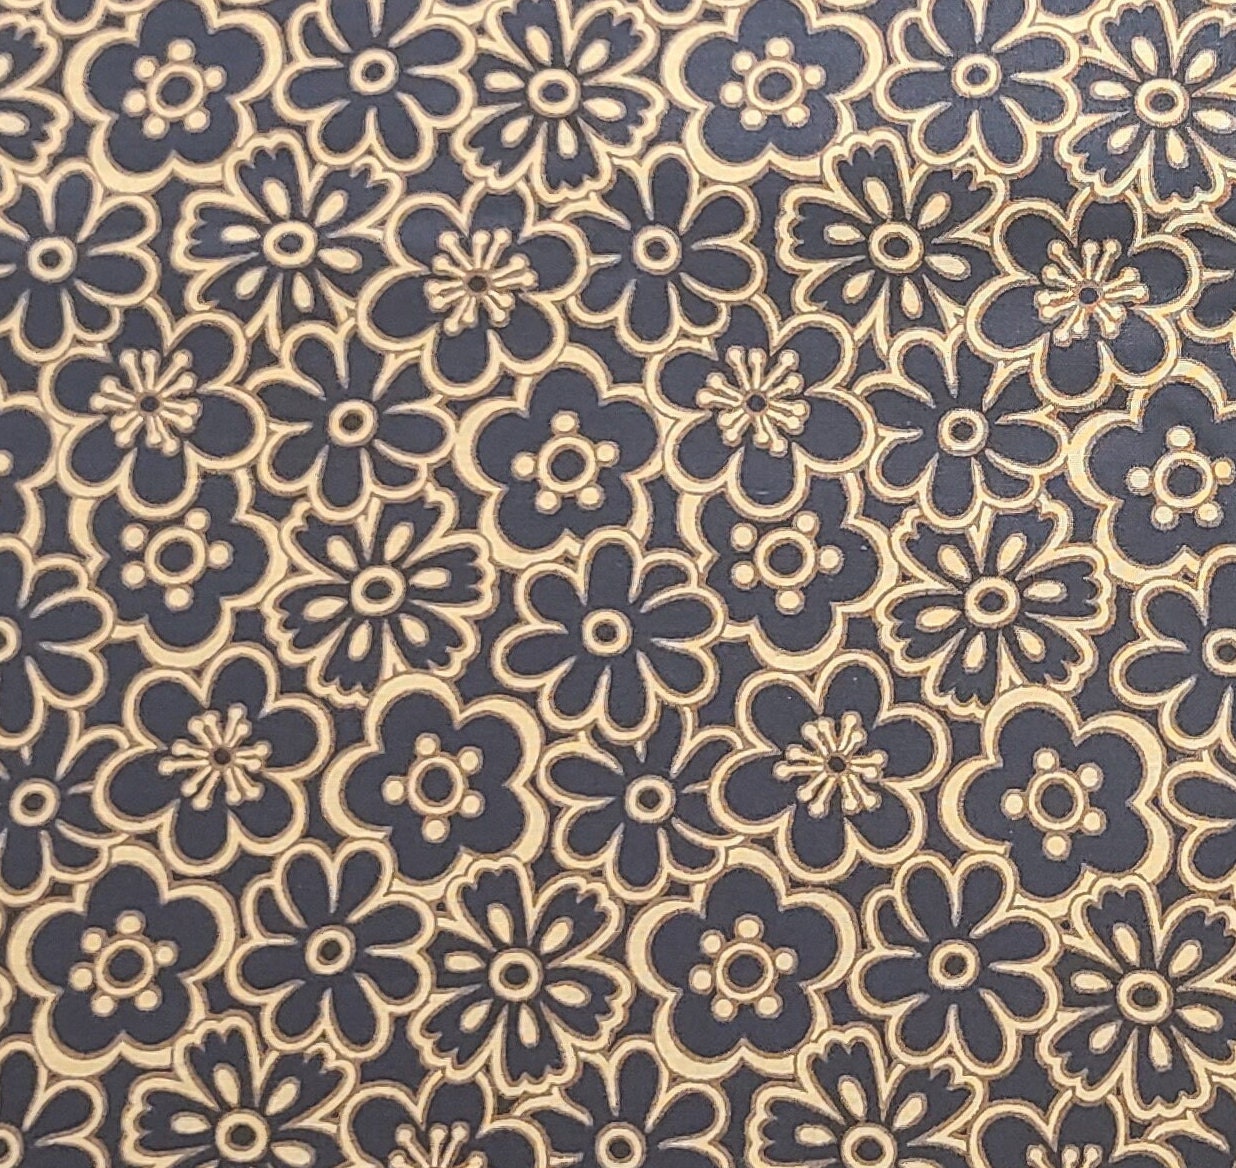 Fabric Traditions 2009 - Black Fabric / Brown and Gold Flower Print